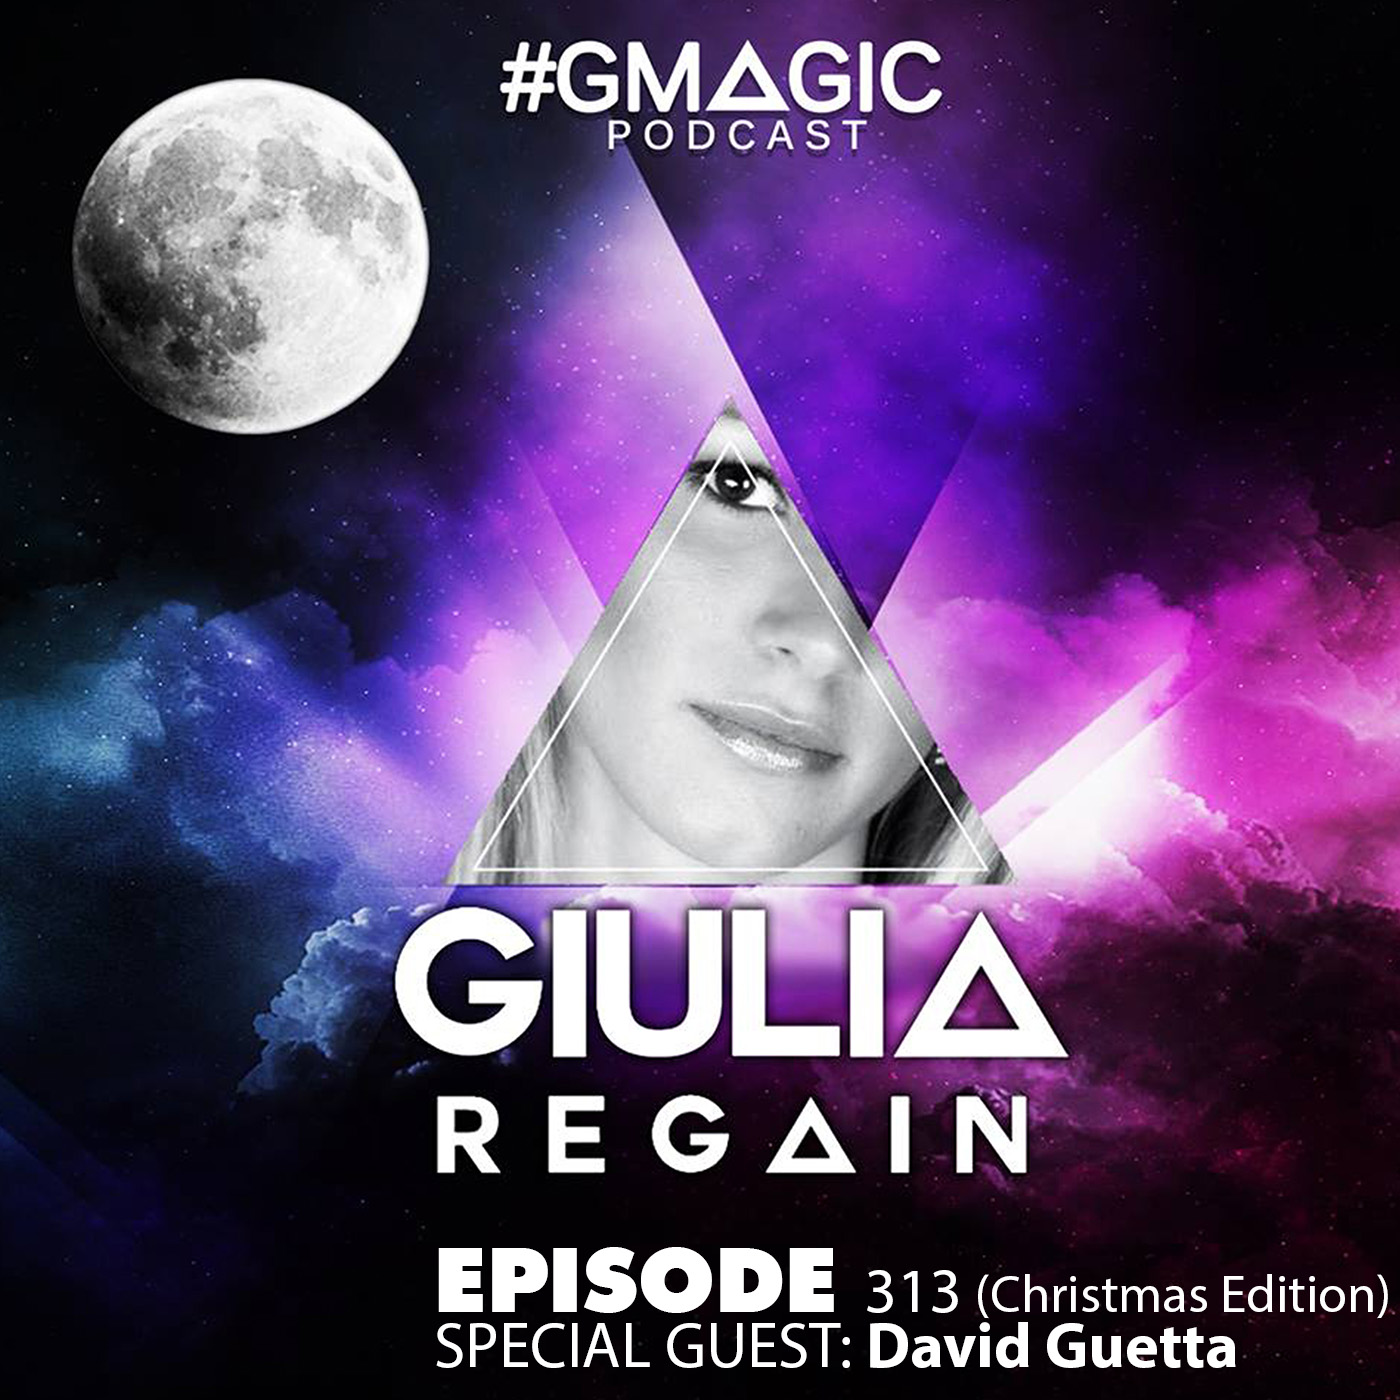 #Gmagic Podcast 313 (Christmas Edition) Special Guest - David Guetta